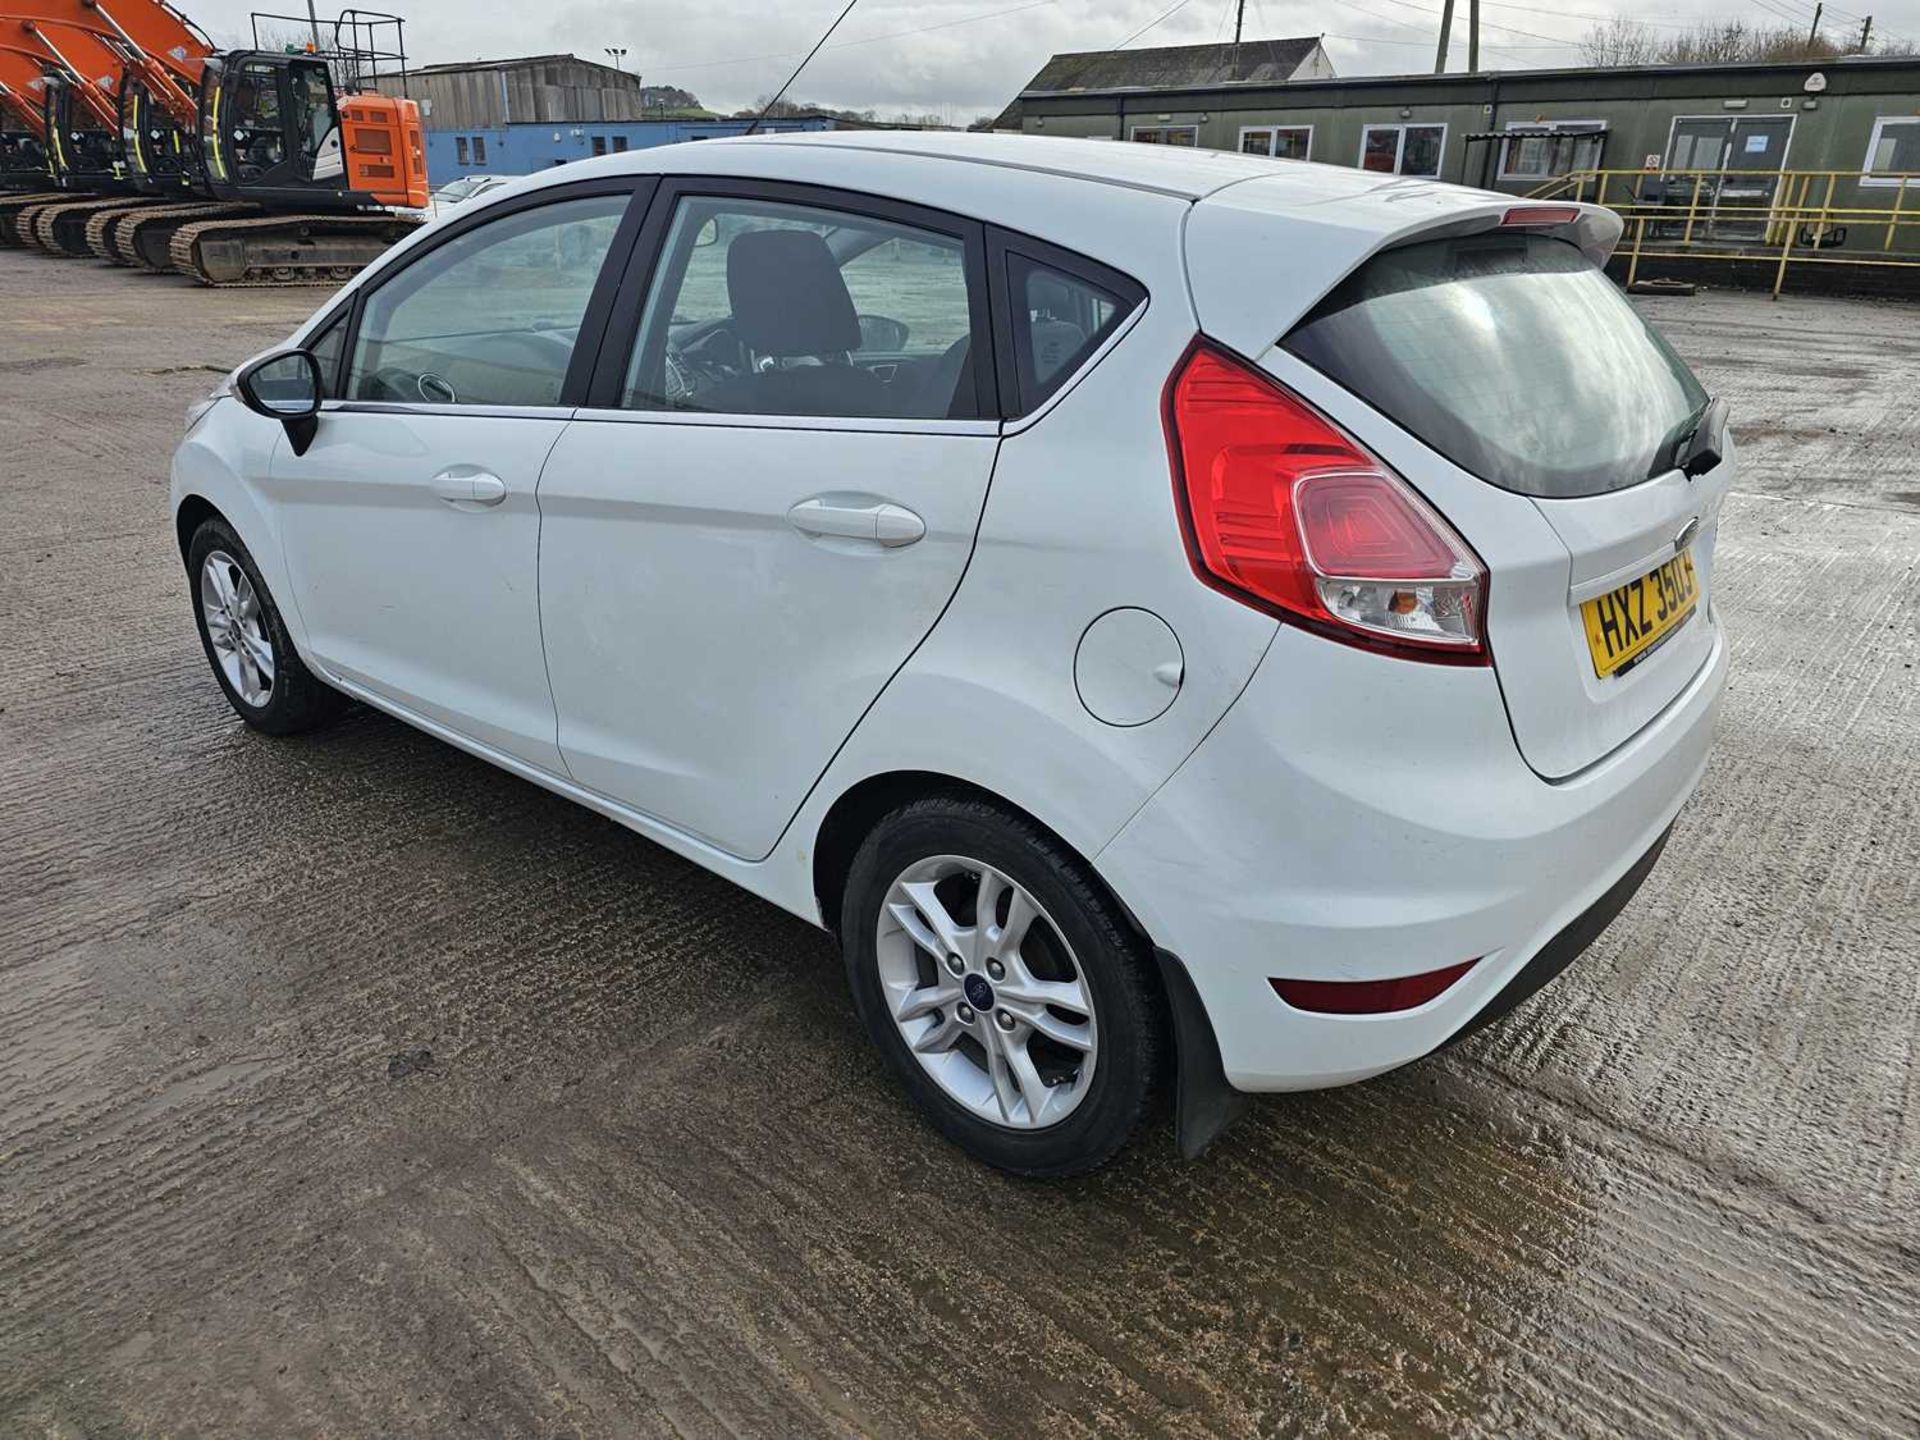 2015 Ford Fiesta, 5 Speed, Bluetooth, A/C (Reg. Docs. & Service History Available, Tested 01/25) - Image 4 of 28